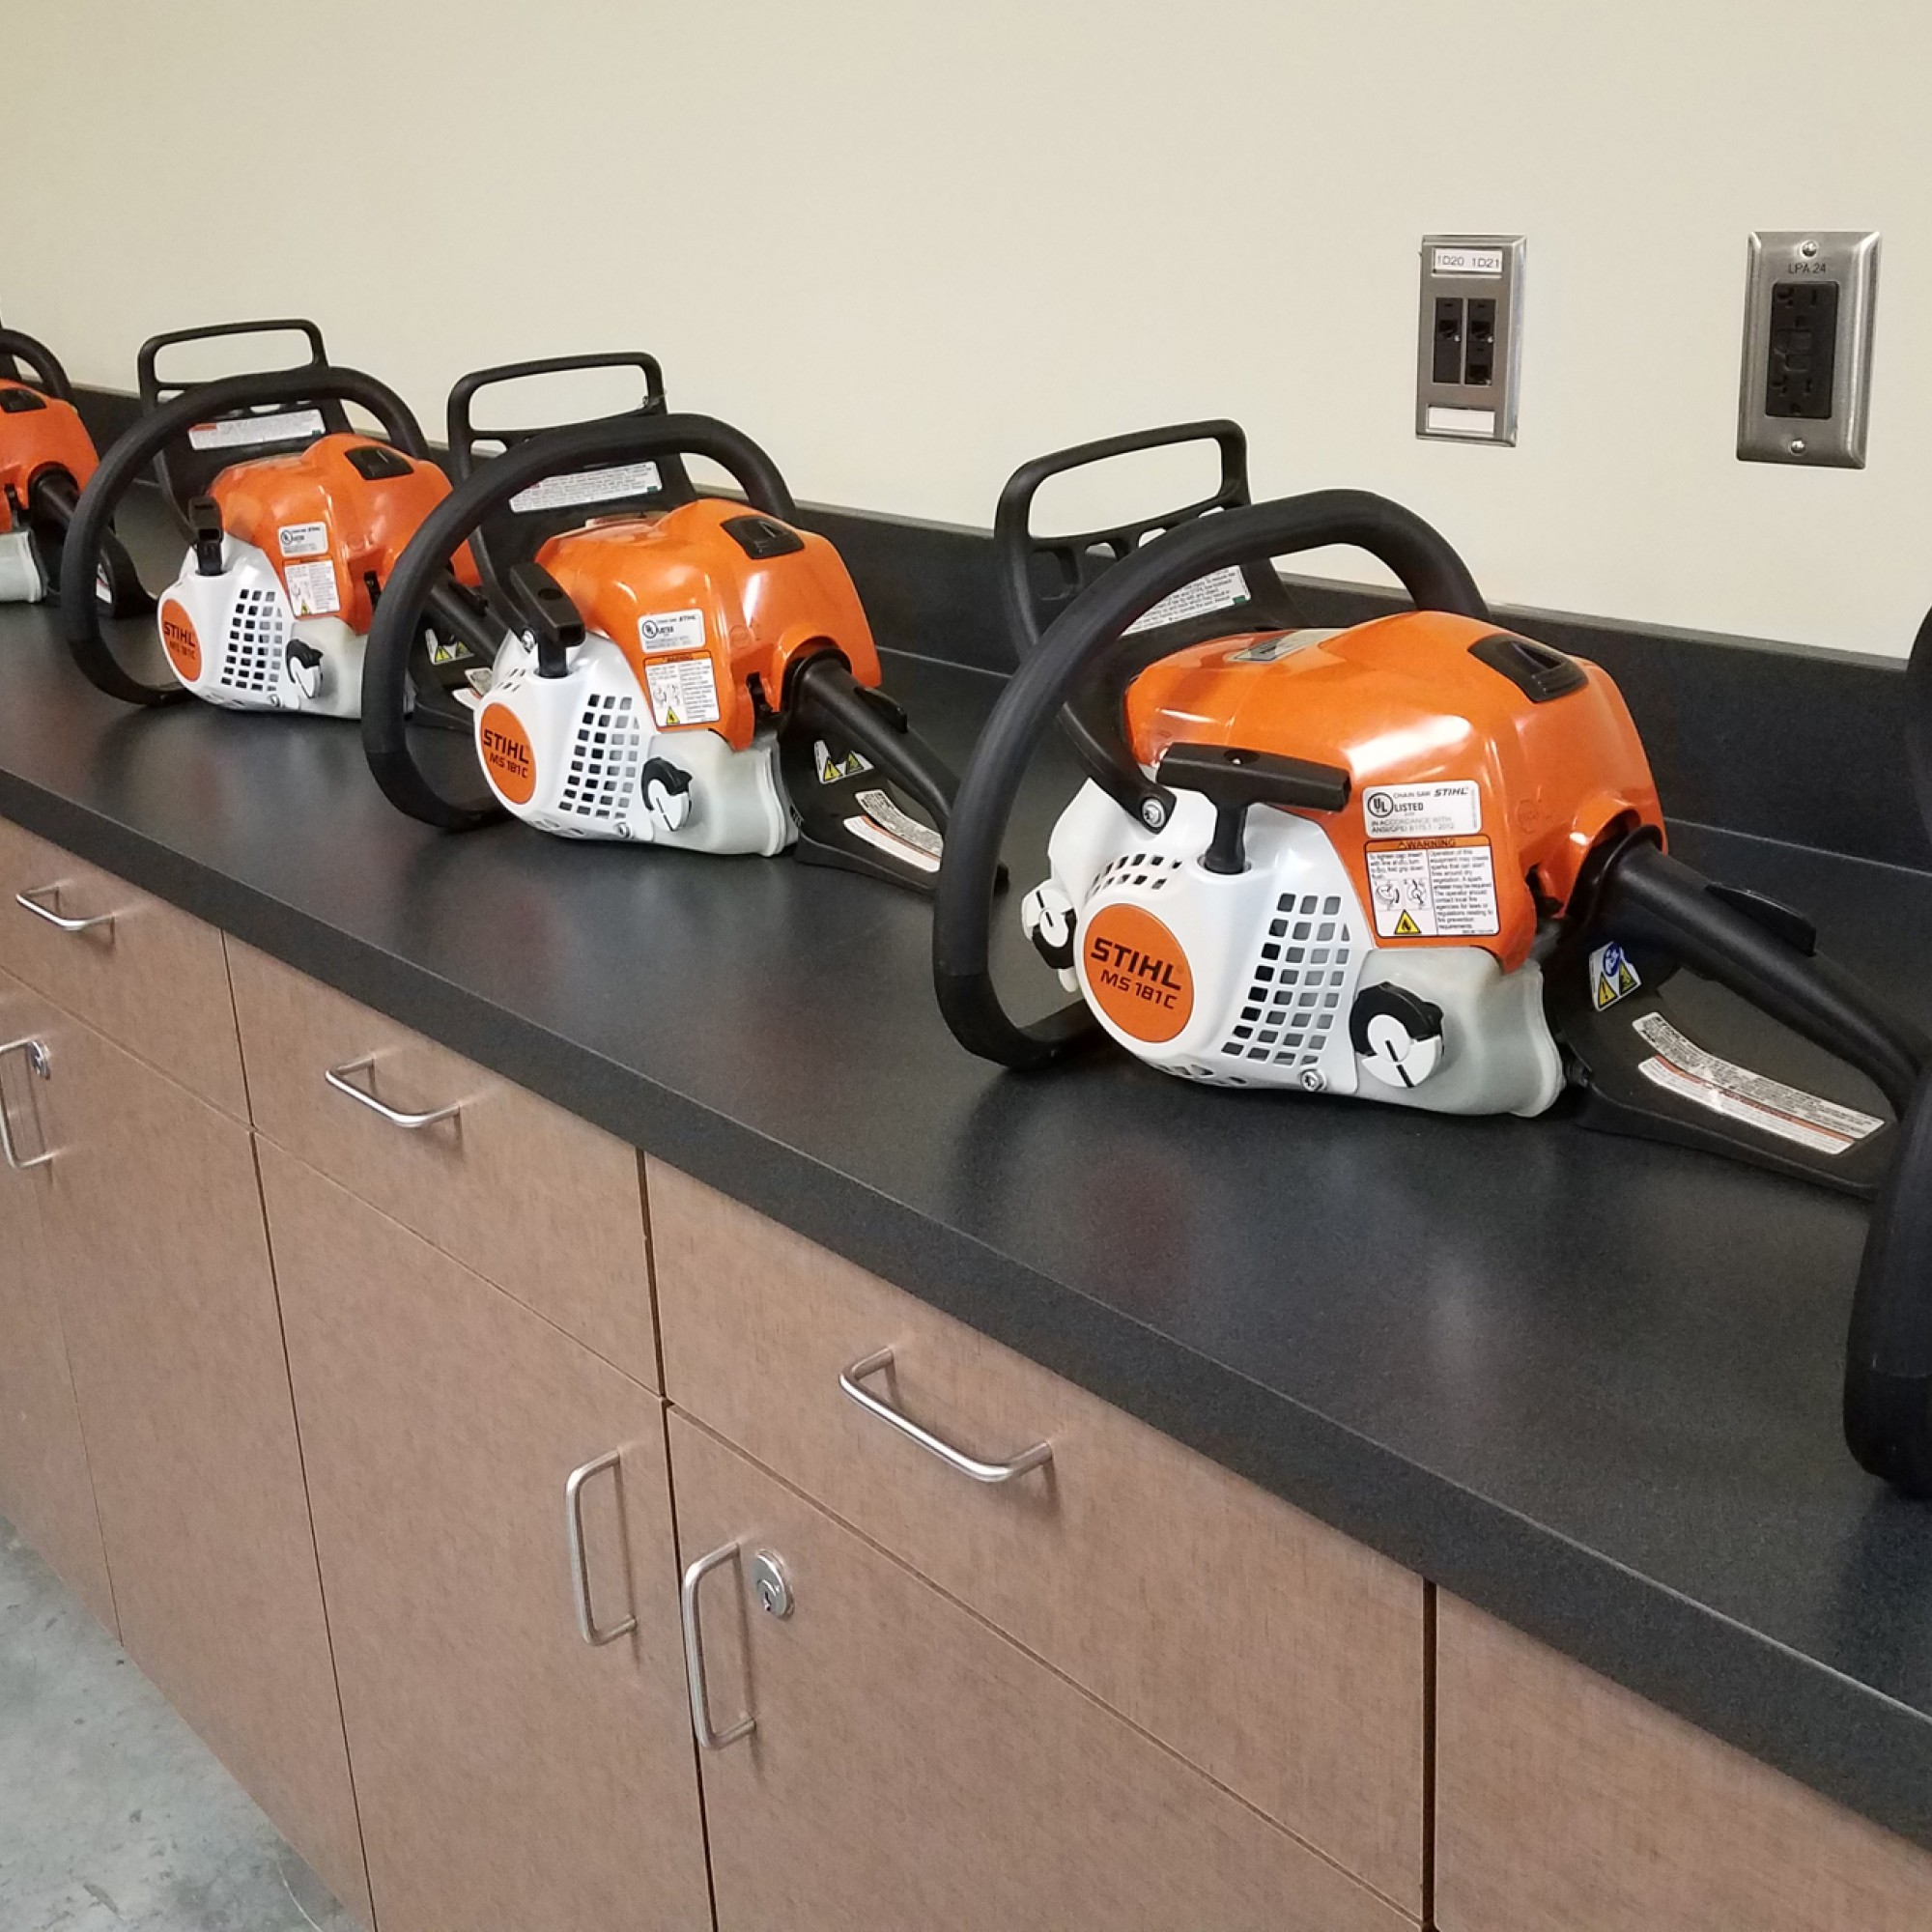 Stihl Northwest visited College of Western Idaho on Nov. 15 and 16 for industry training.